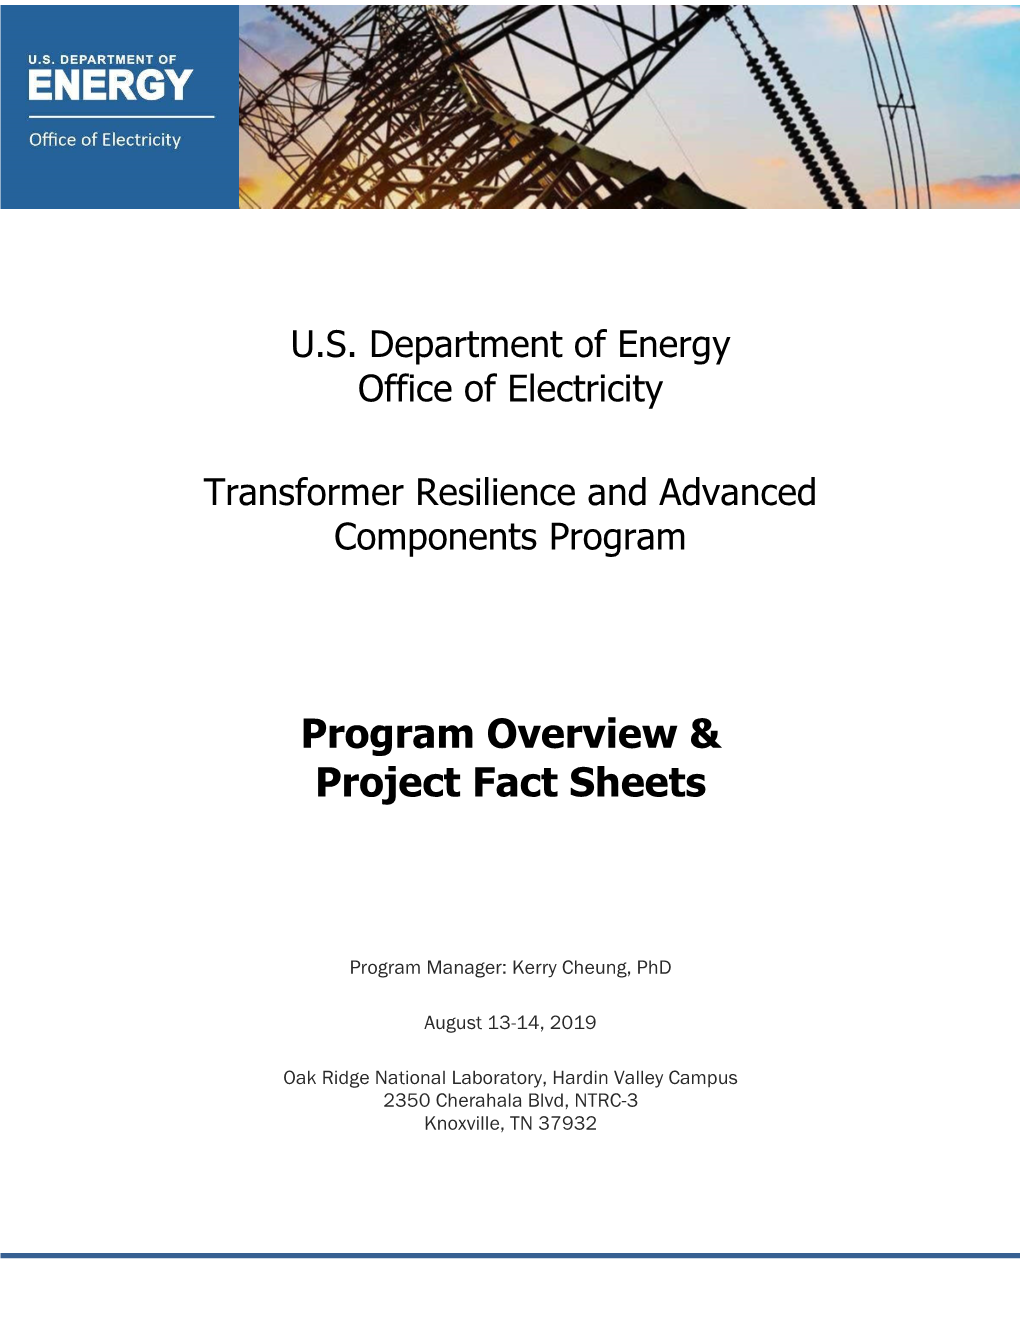 Program Overview & Project Fact Sheets